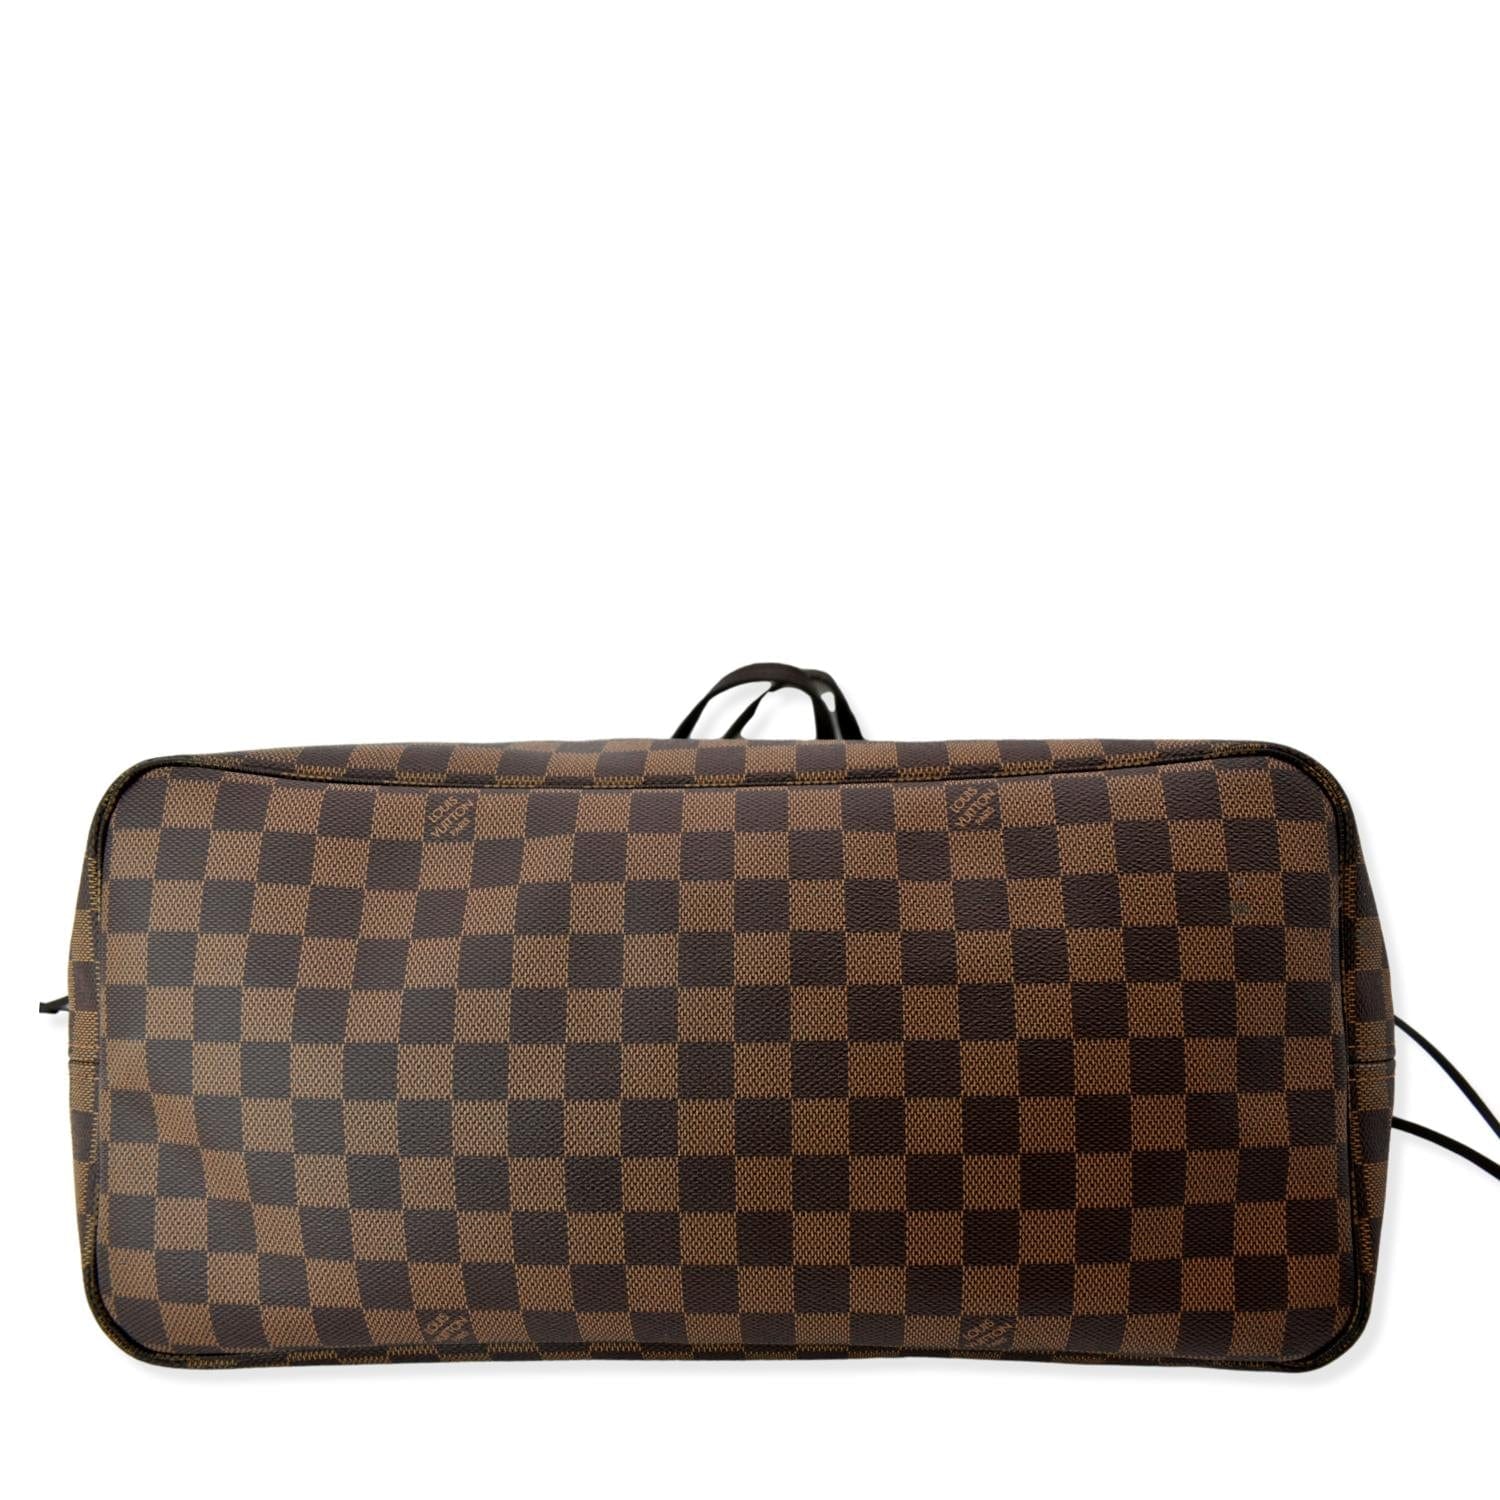 Louis Vuitton Neverfull GM Monogram Tote - Dress Raleigh Consignment